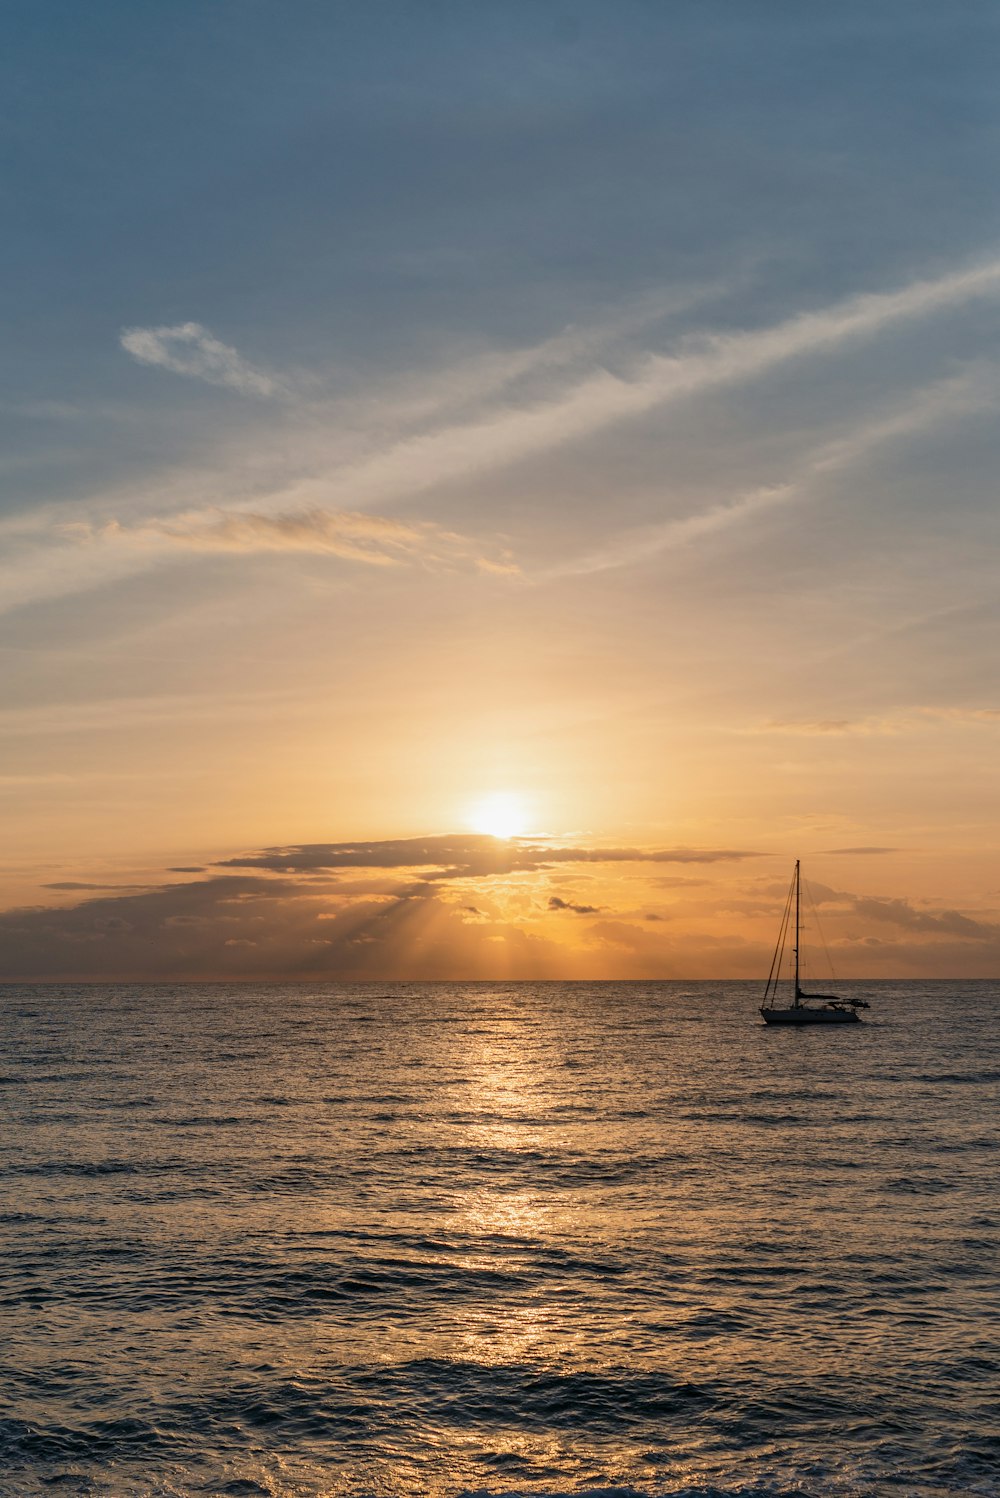 the sun is setting over the ocean with a sailboat in the water